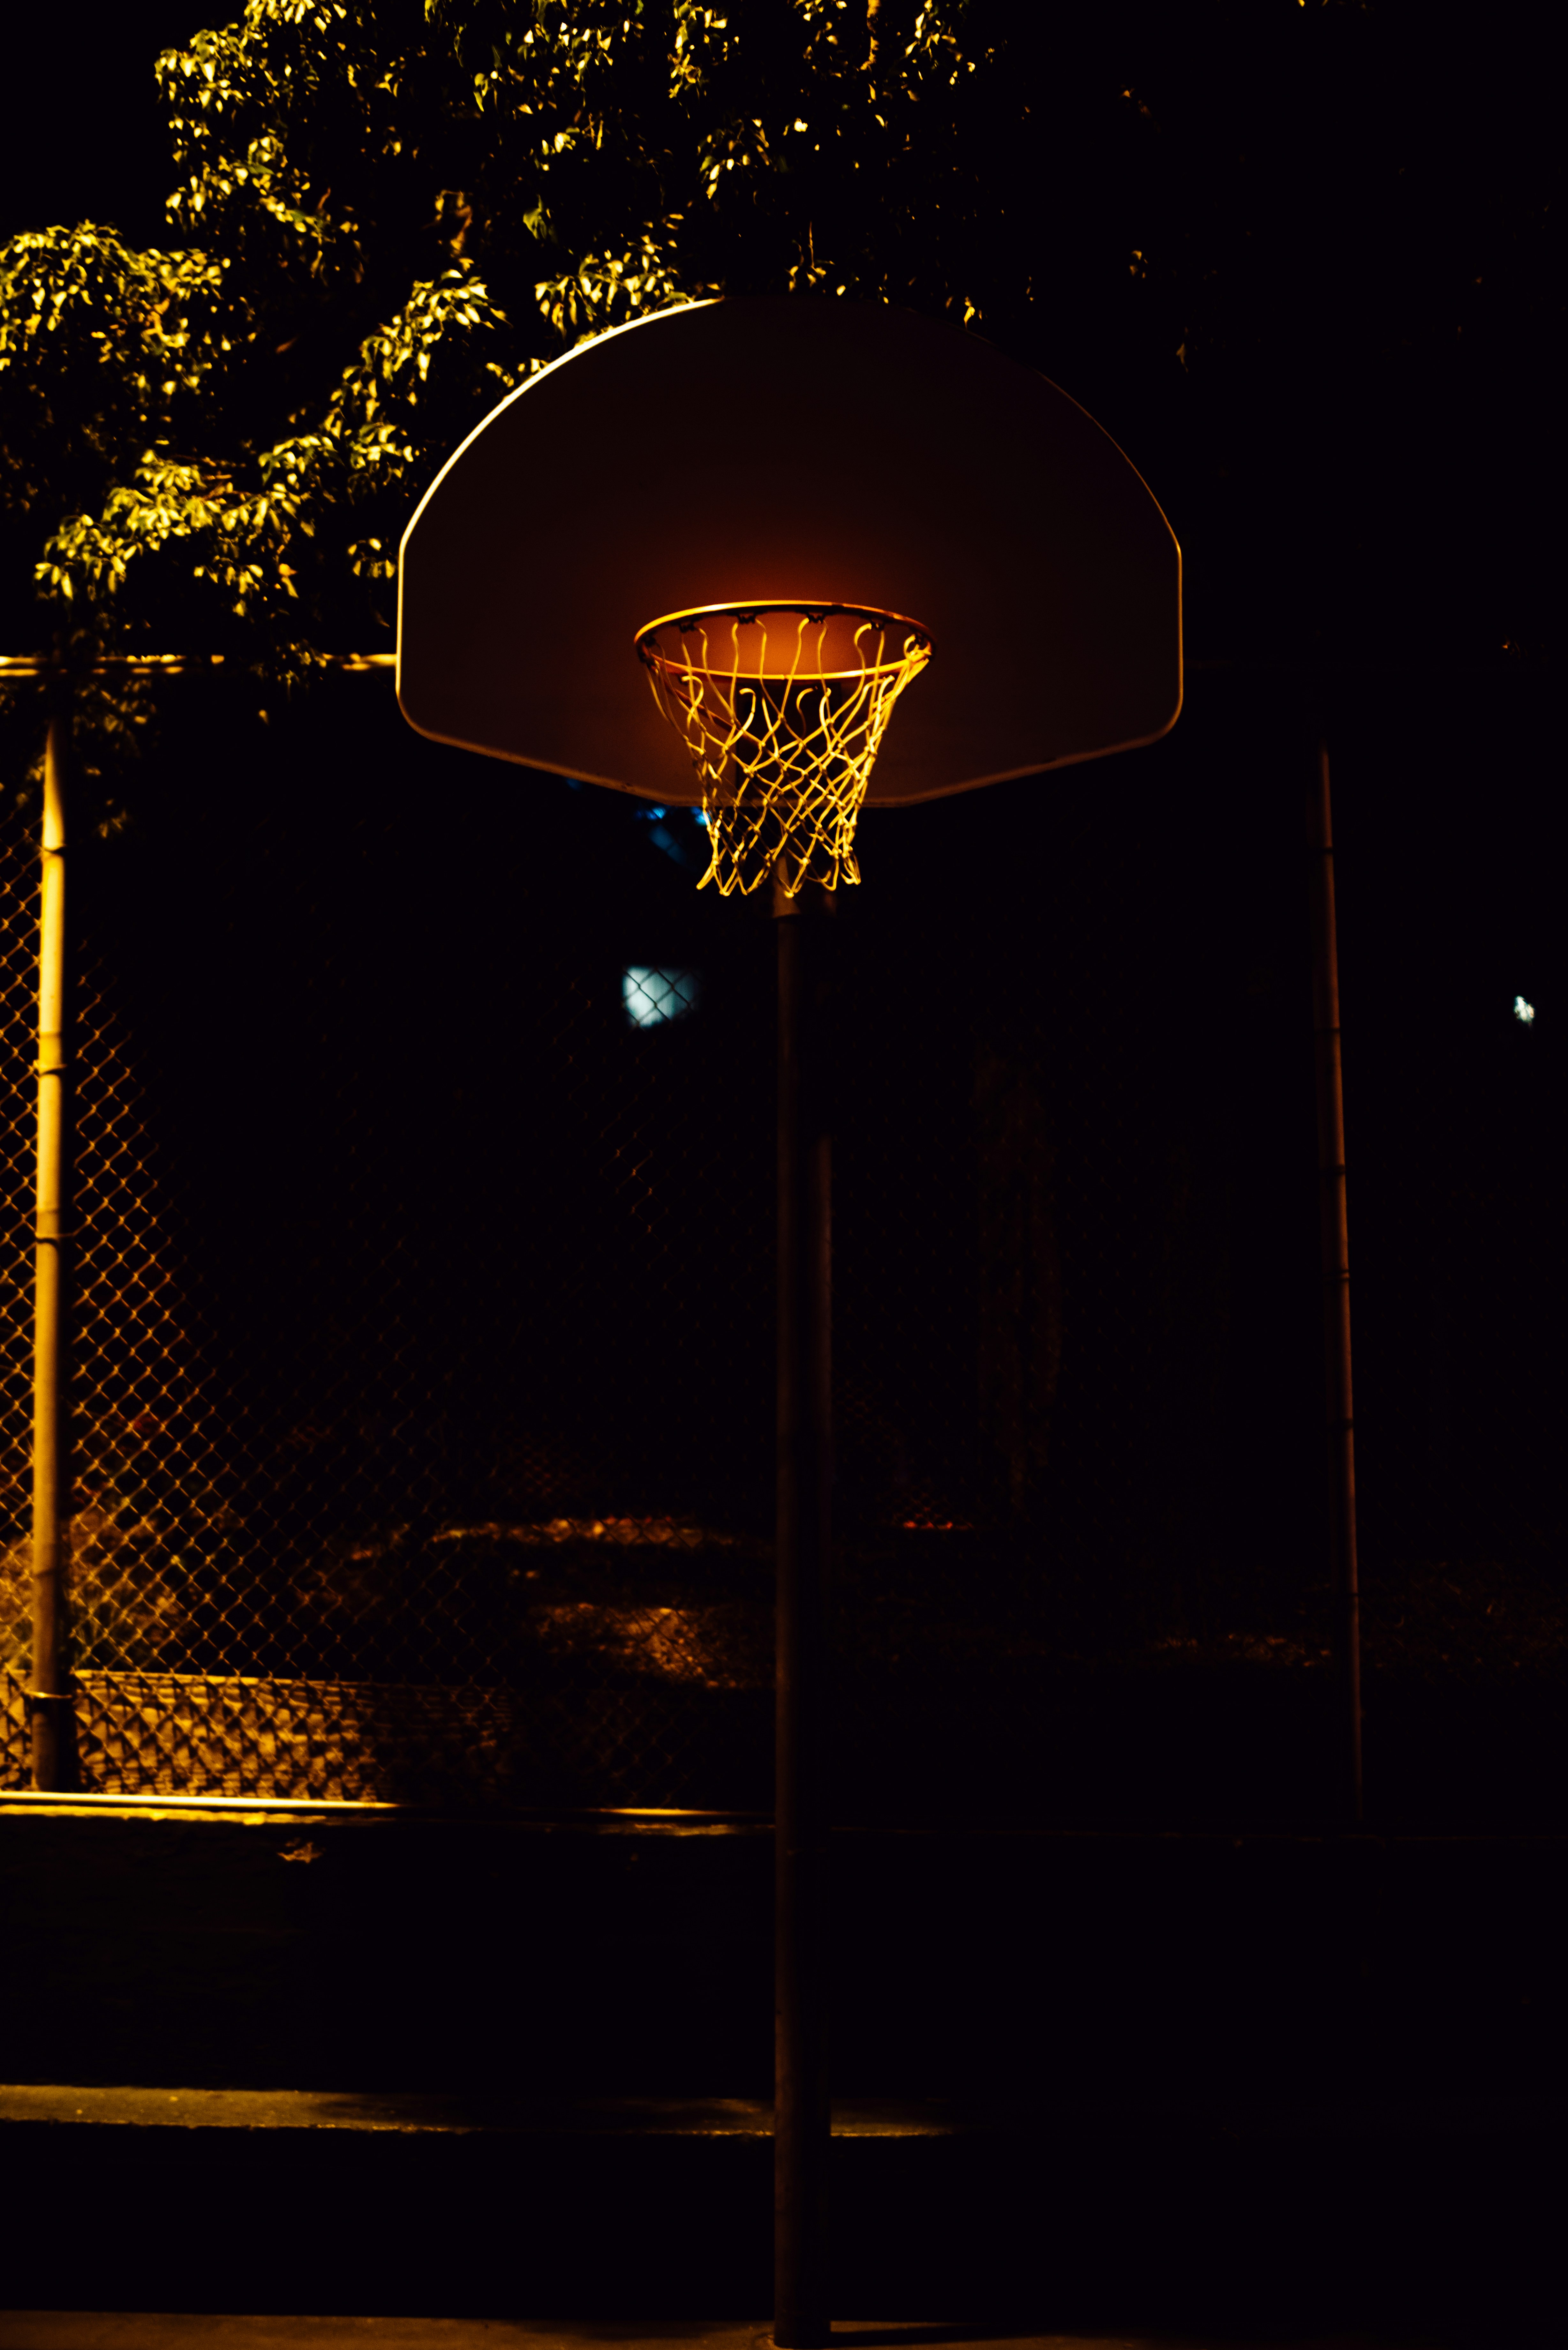 brown and white basketball hoop with net